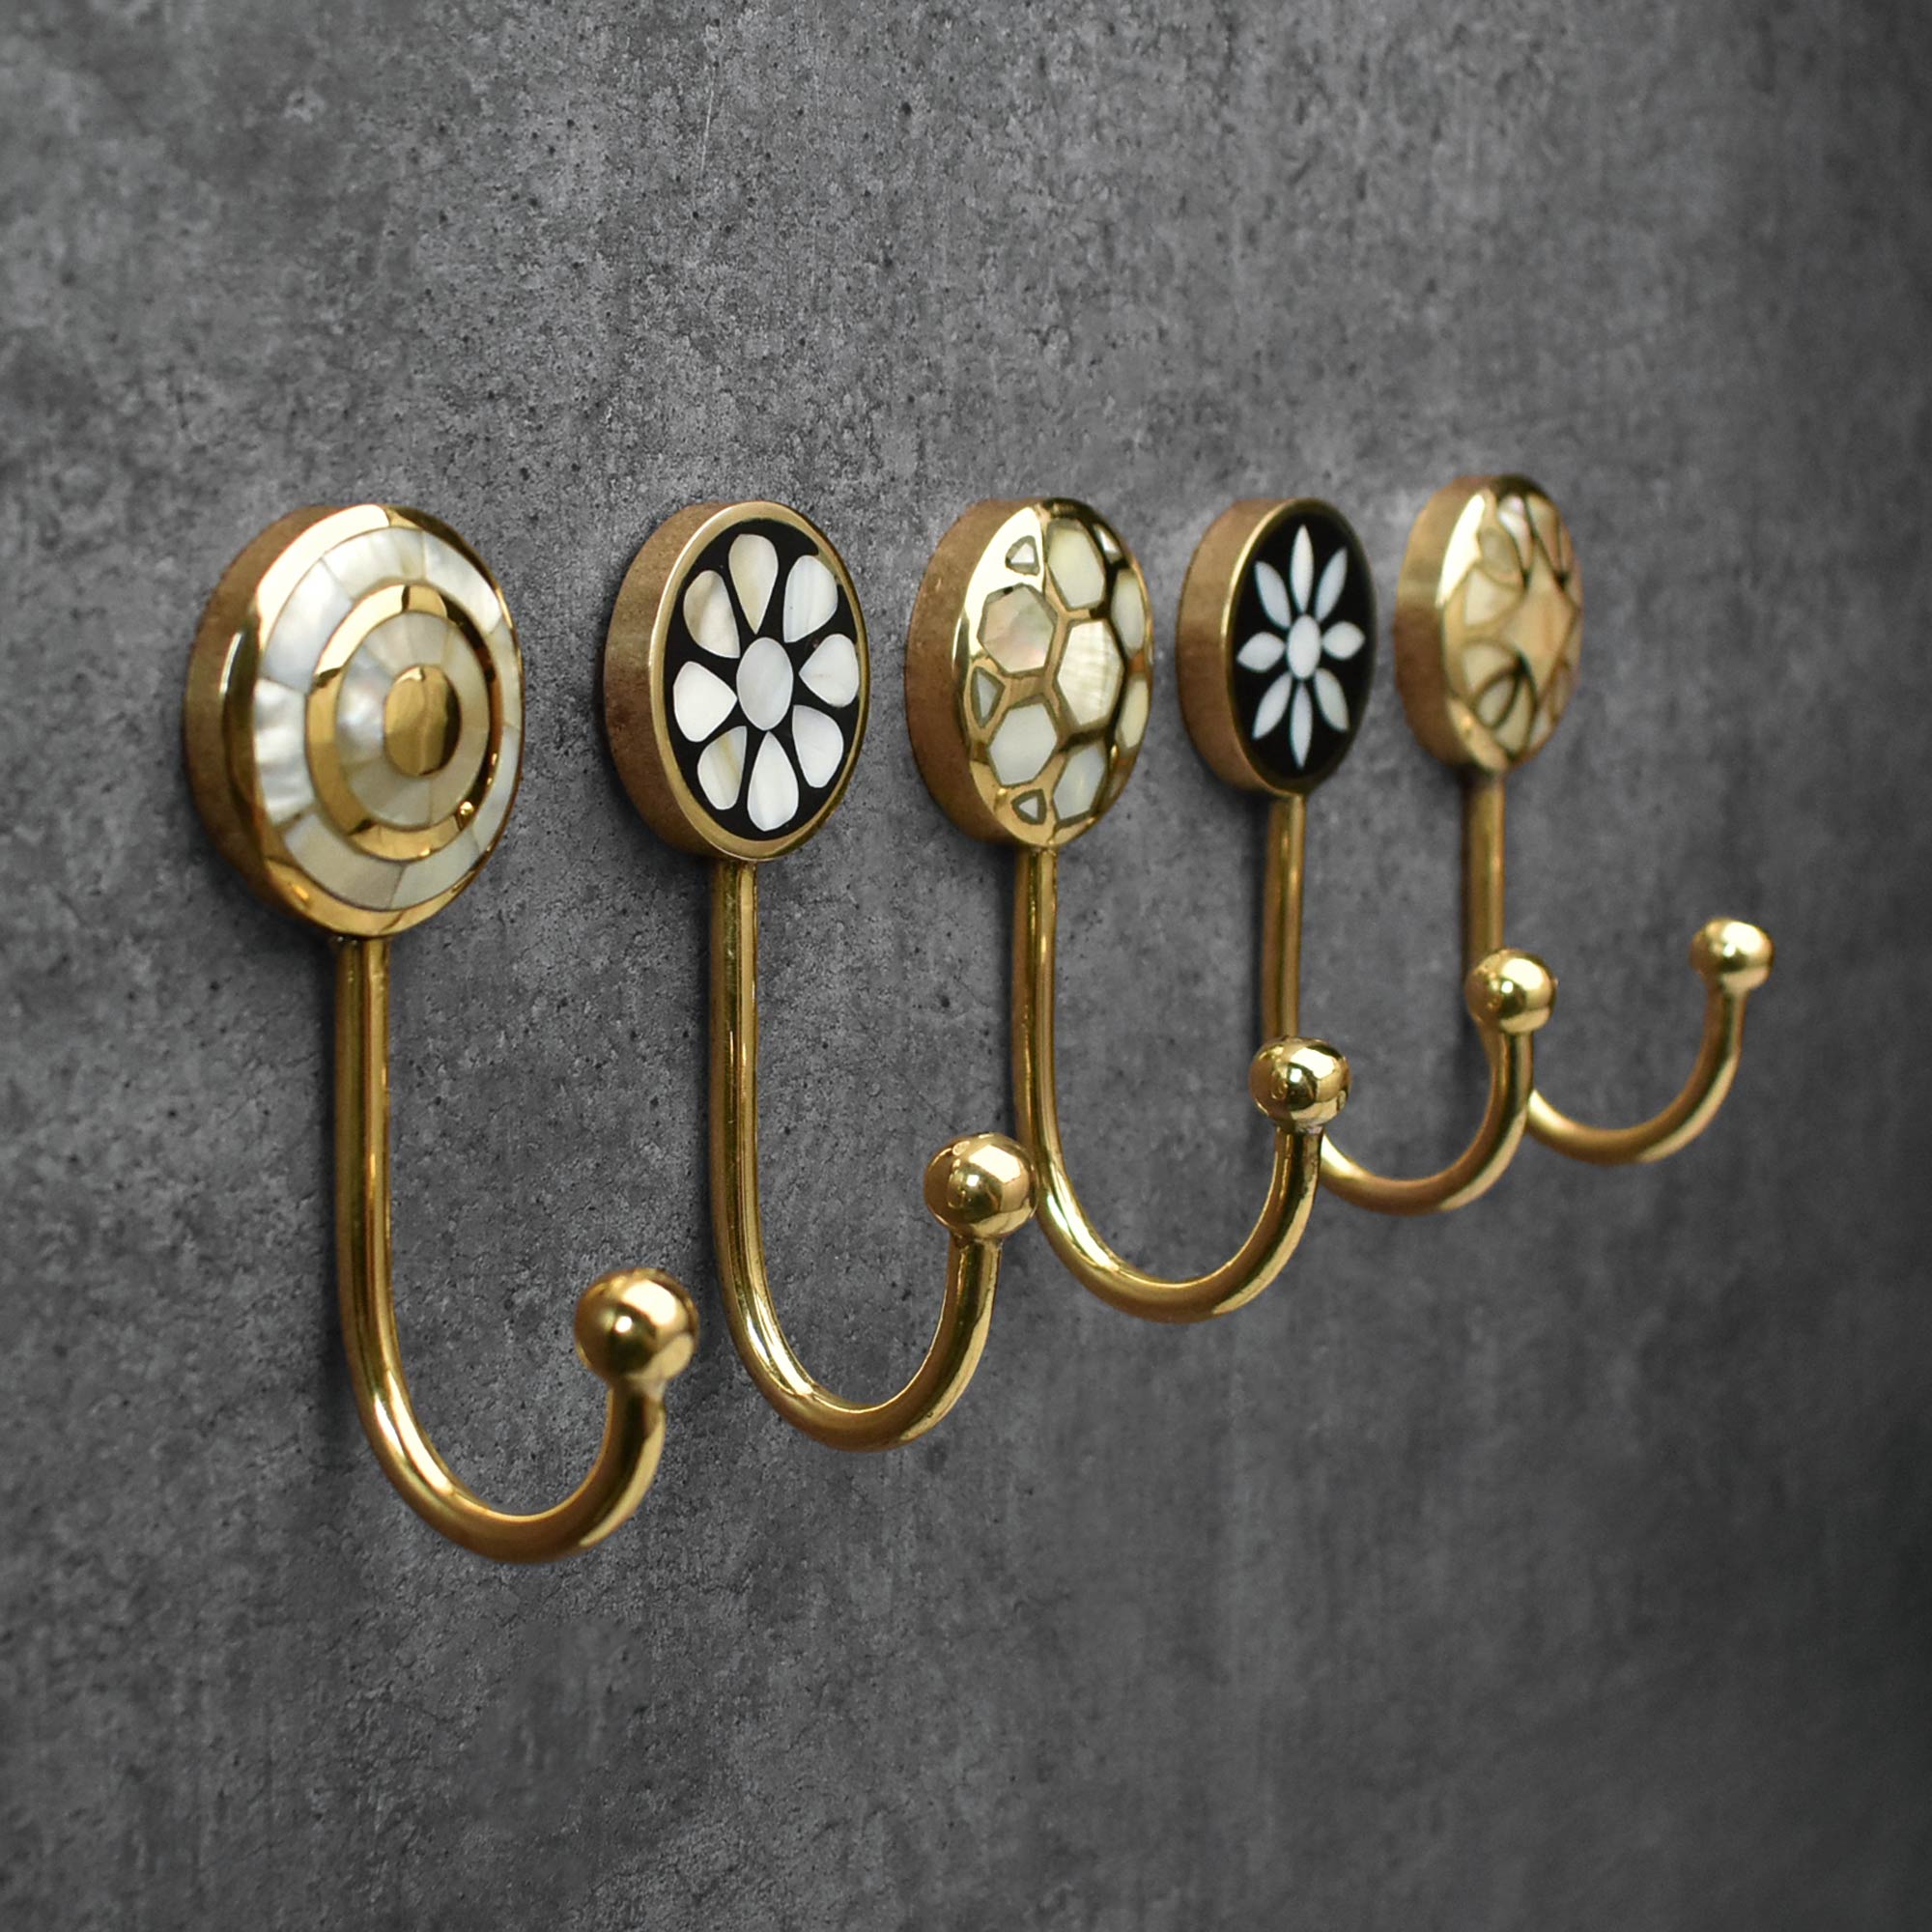 Brass and Mother of Pearl Wall Hooks and Wall Hanger